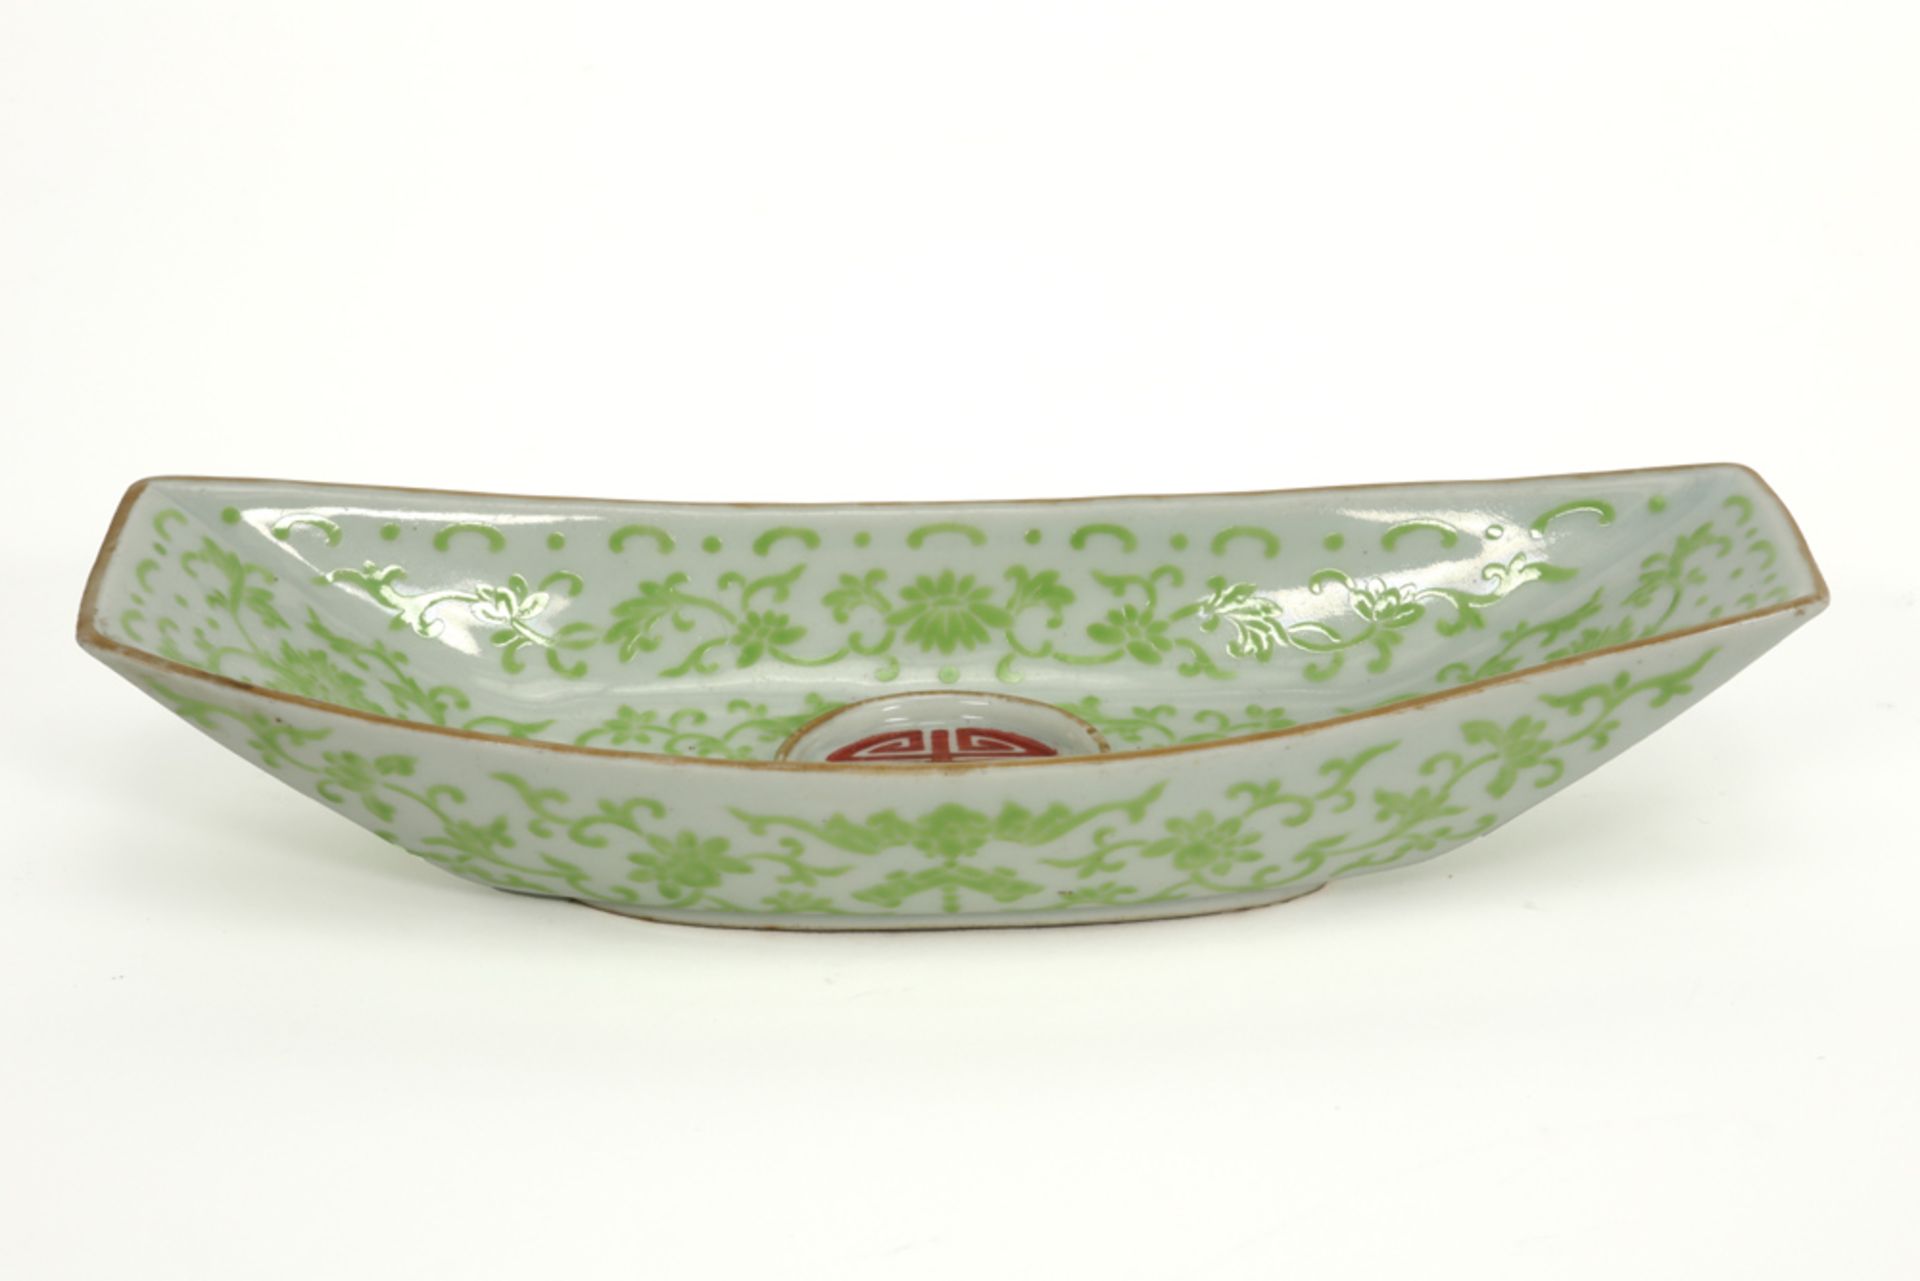 Chinese boat-shaped dish in marked porcelain with a floral decor in green || Chinees bootvormig